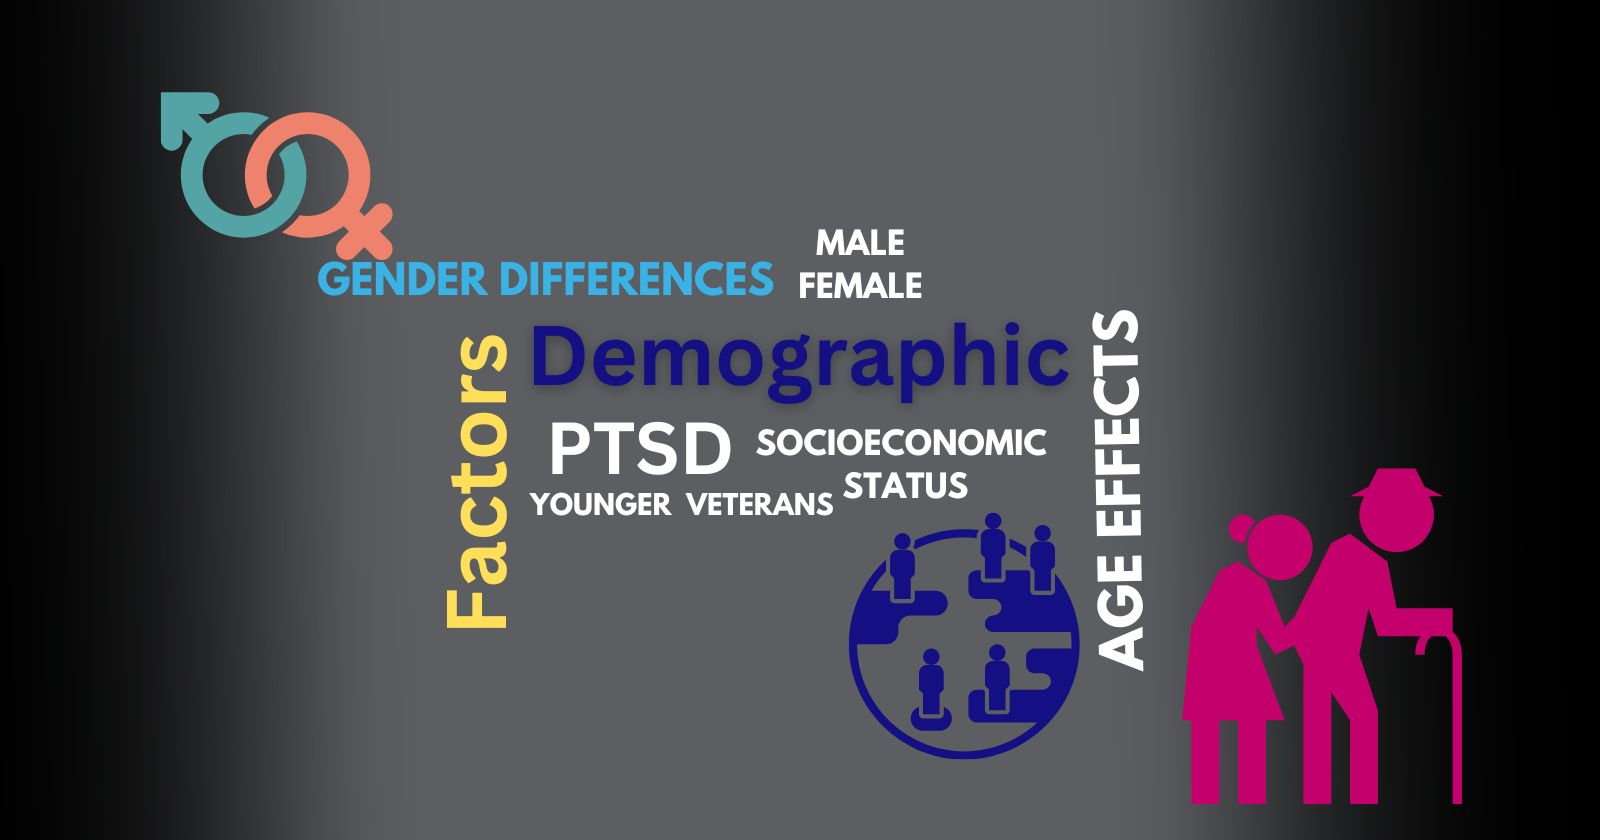 Demographic Factors in PTSD

Image with multiple text box and old people symbol.Text boxes are about Demographic, Factors, PTSD, AGE effects